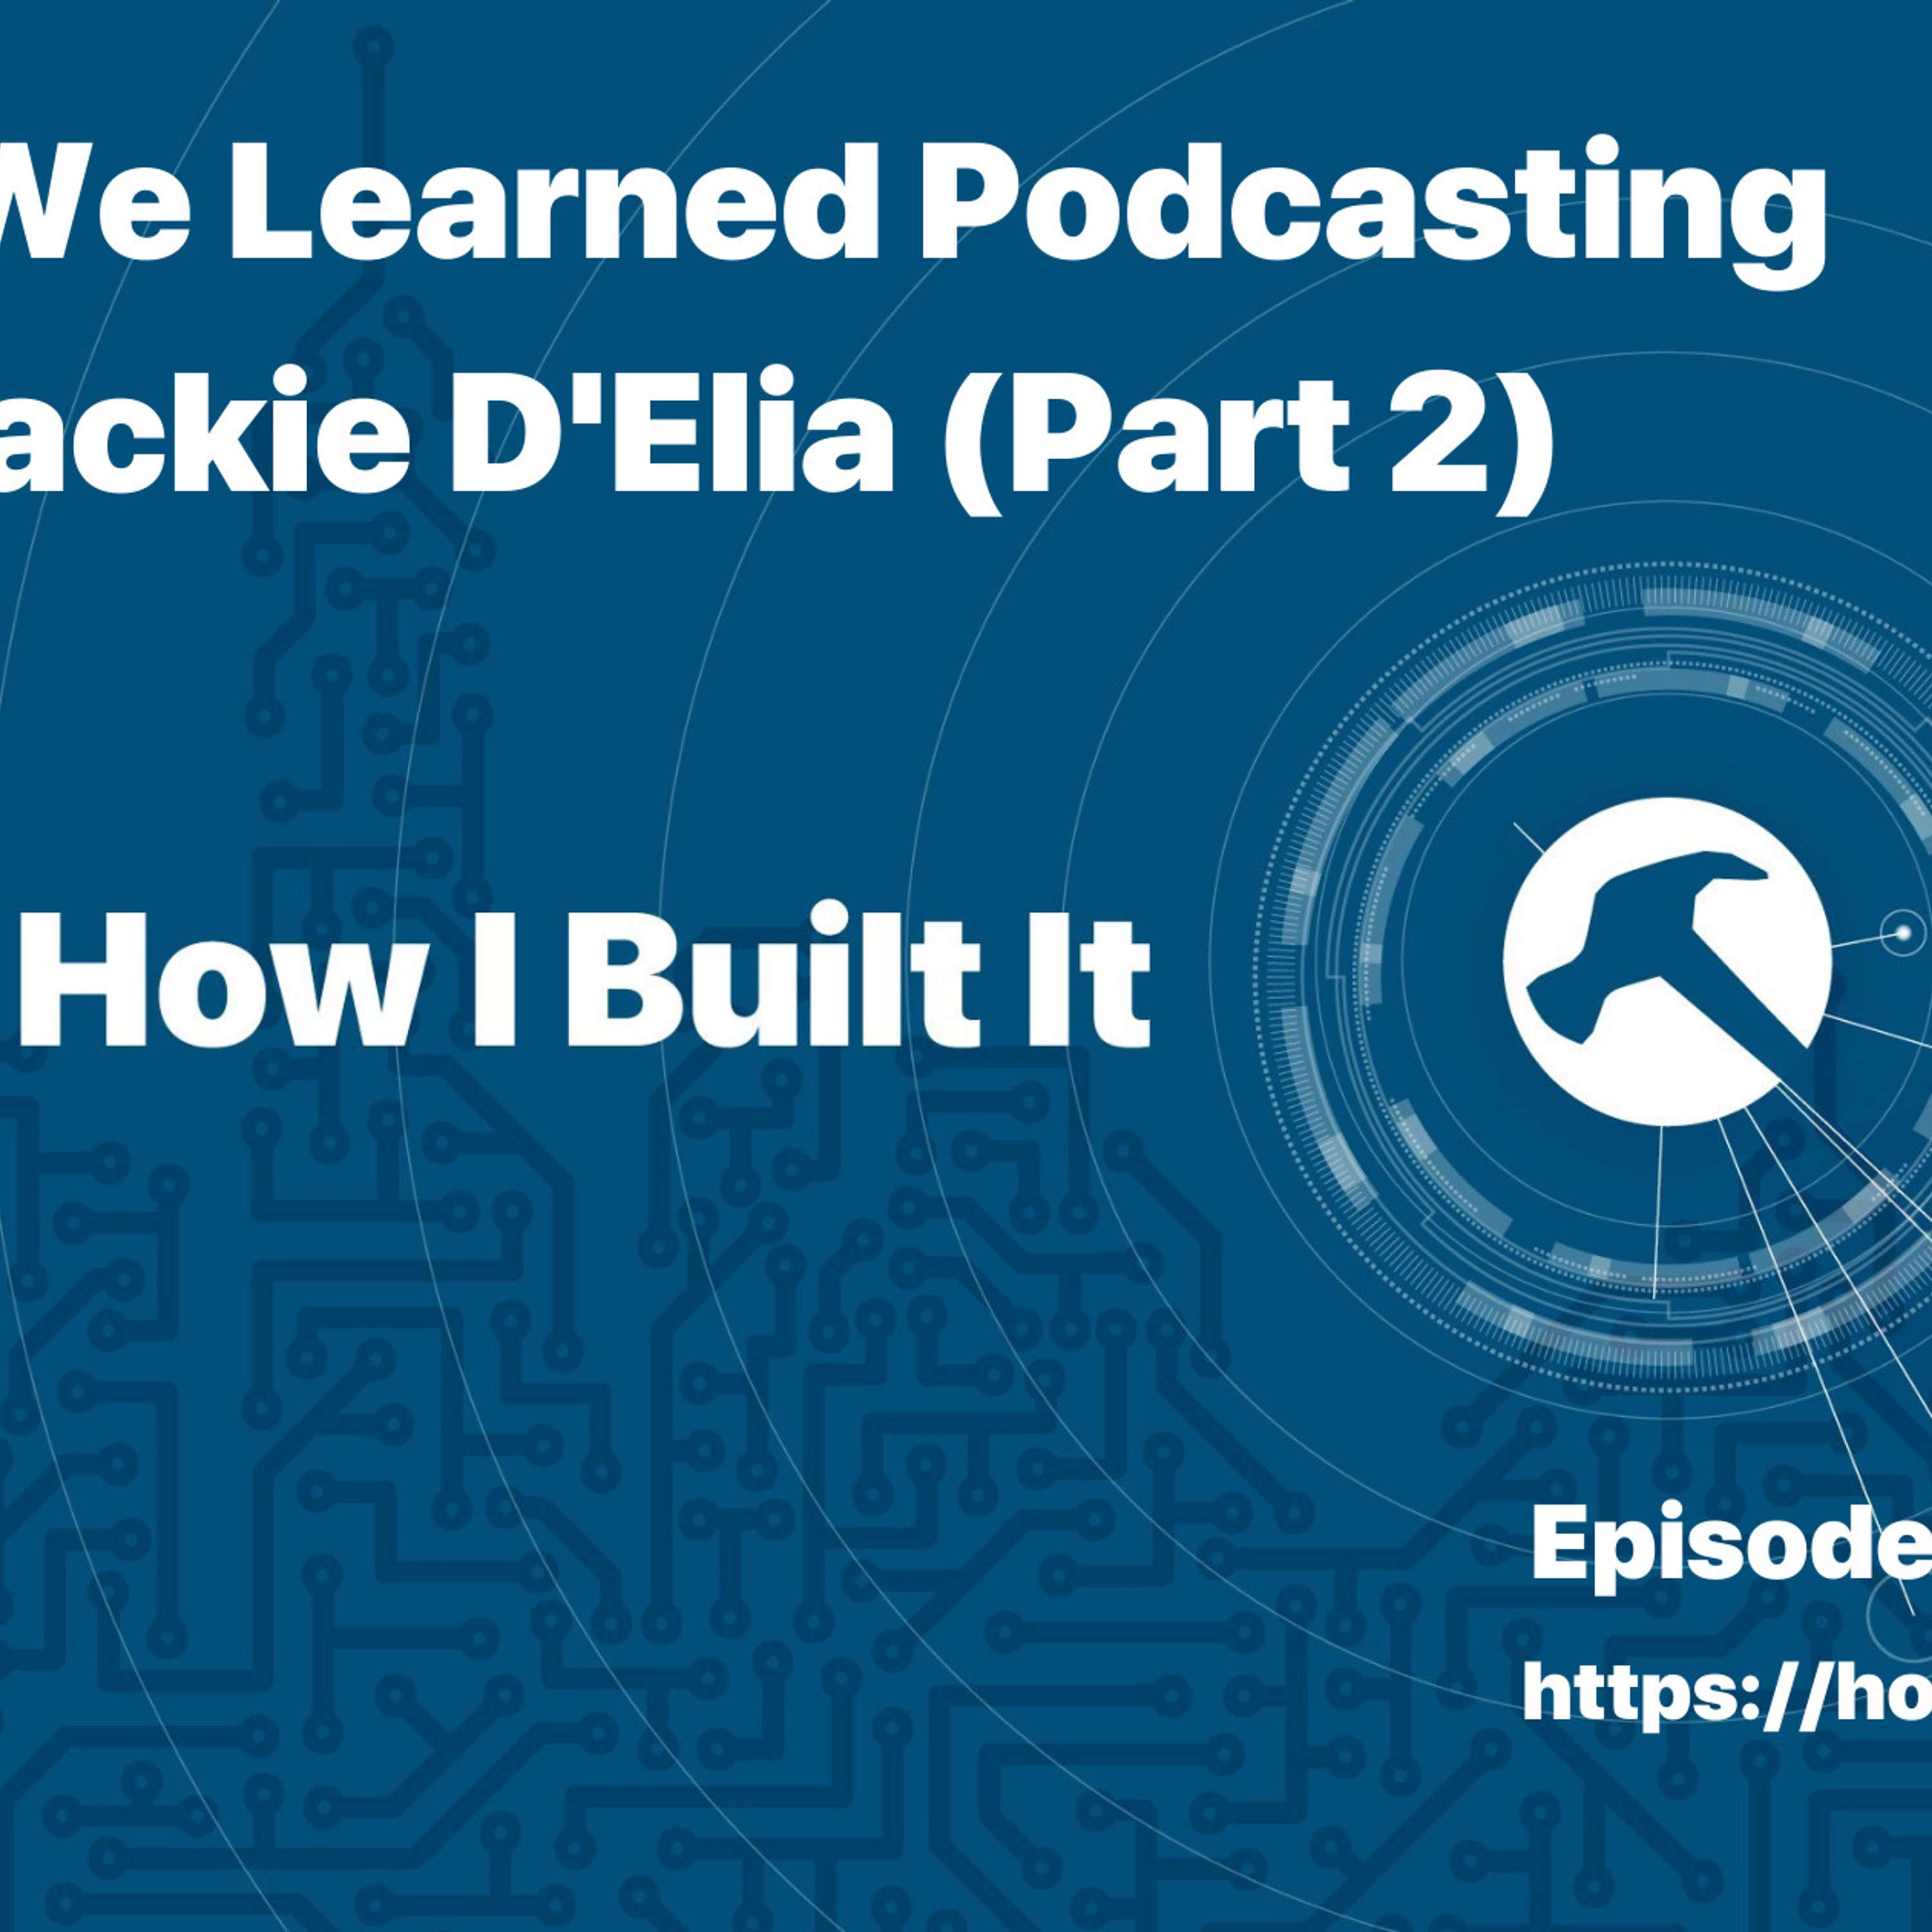 What We Learned Podcasting with Jackie D’Elia (Part 2)